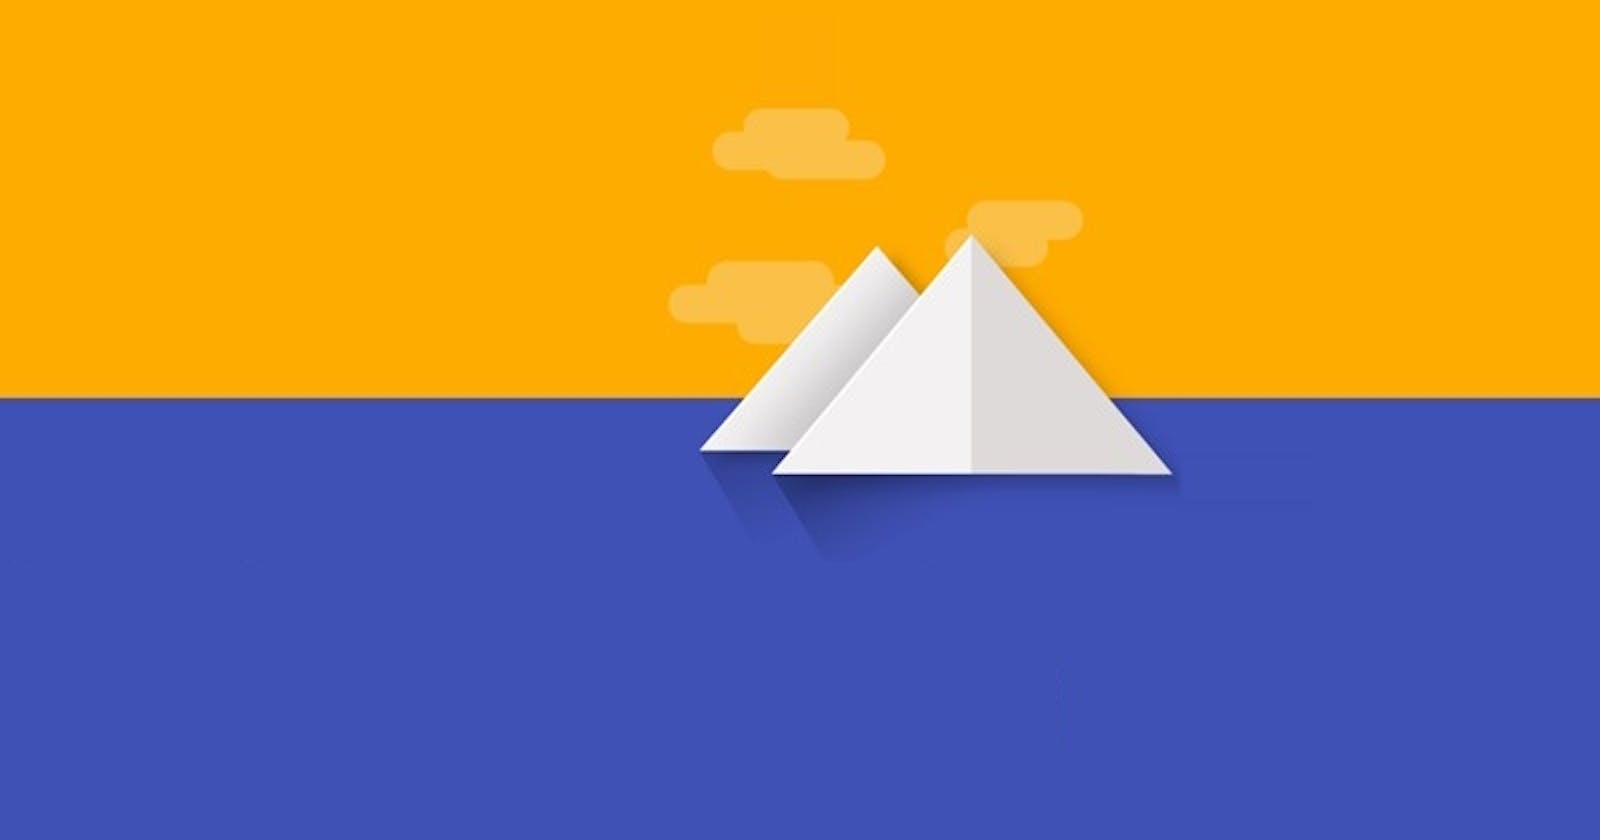 Island. Make a separate space for apps you don't trust enough!